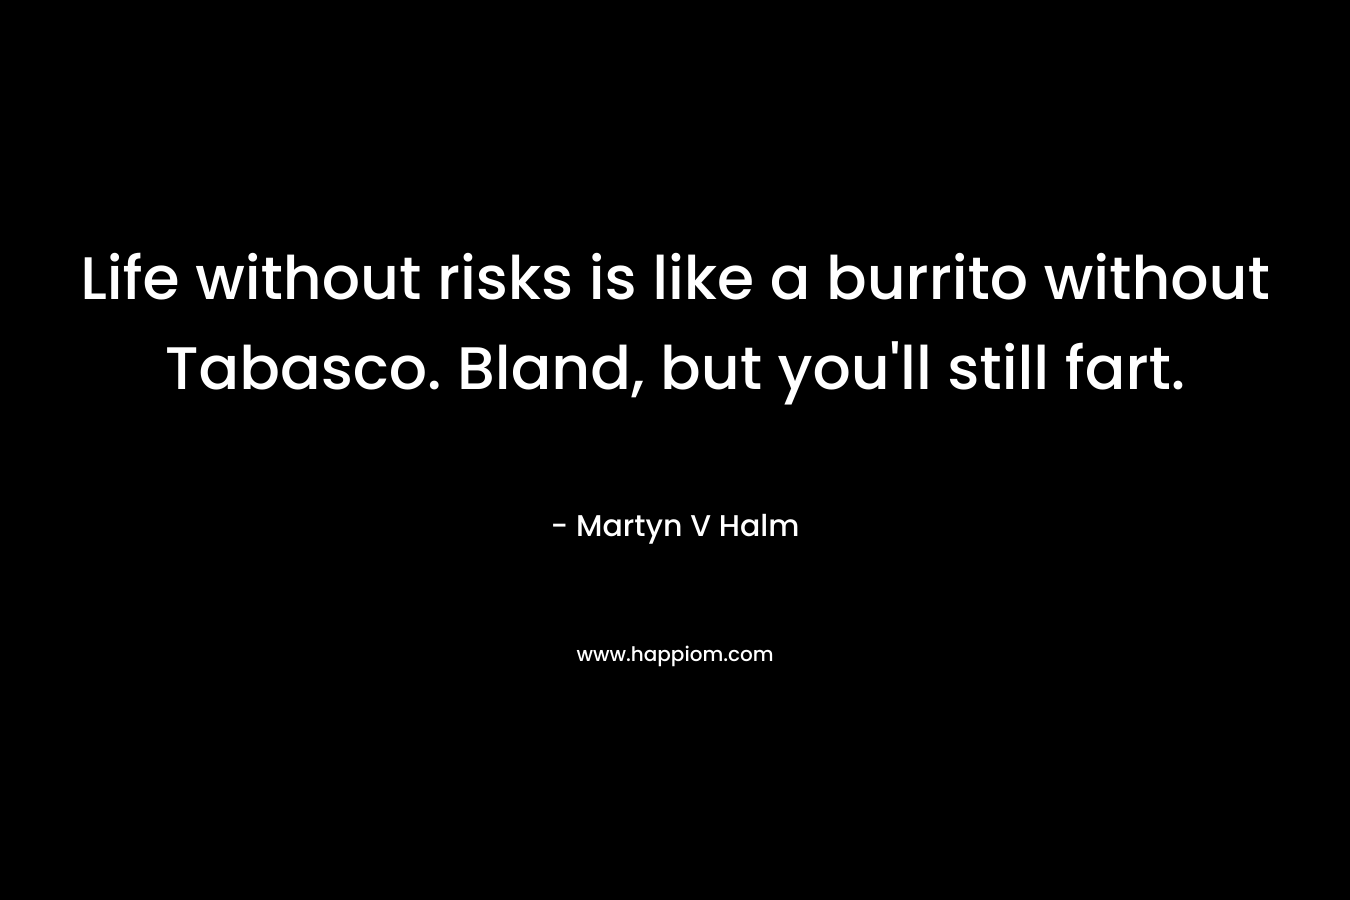 Life without risks is like a burrito without Tabasco. Bland, but you’ll still fart. – Martyn V Halm